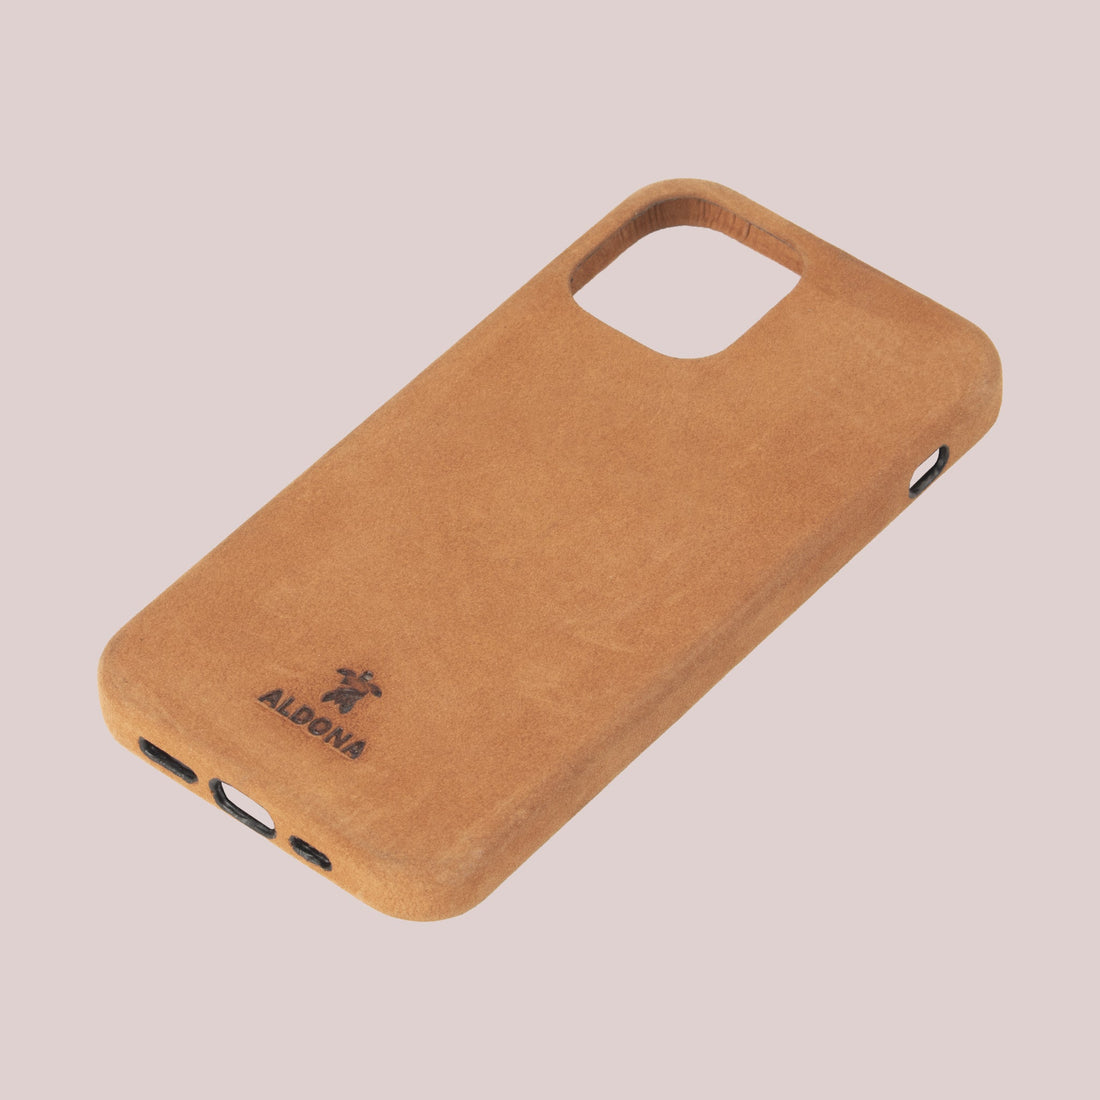 Kalon Case for iPhone 13 with MagSafe Compatibility - Vintage Tan